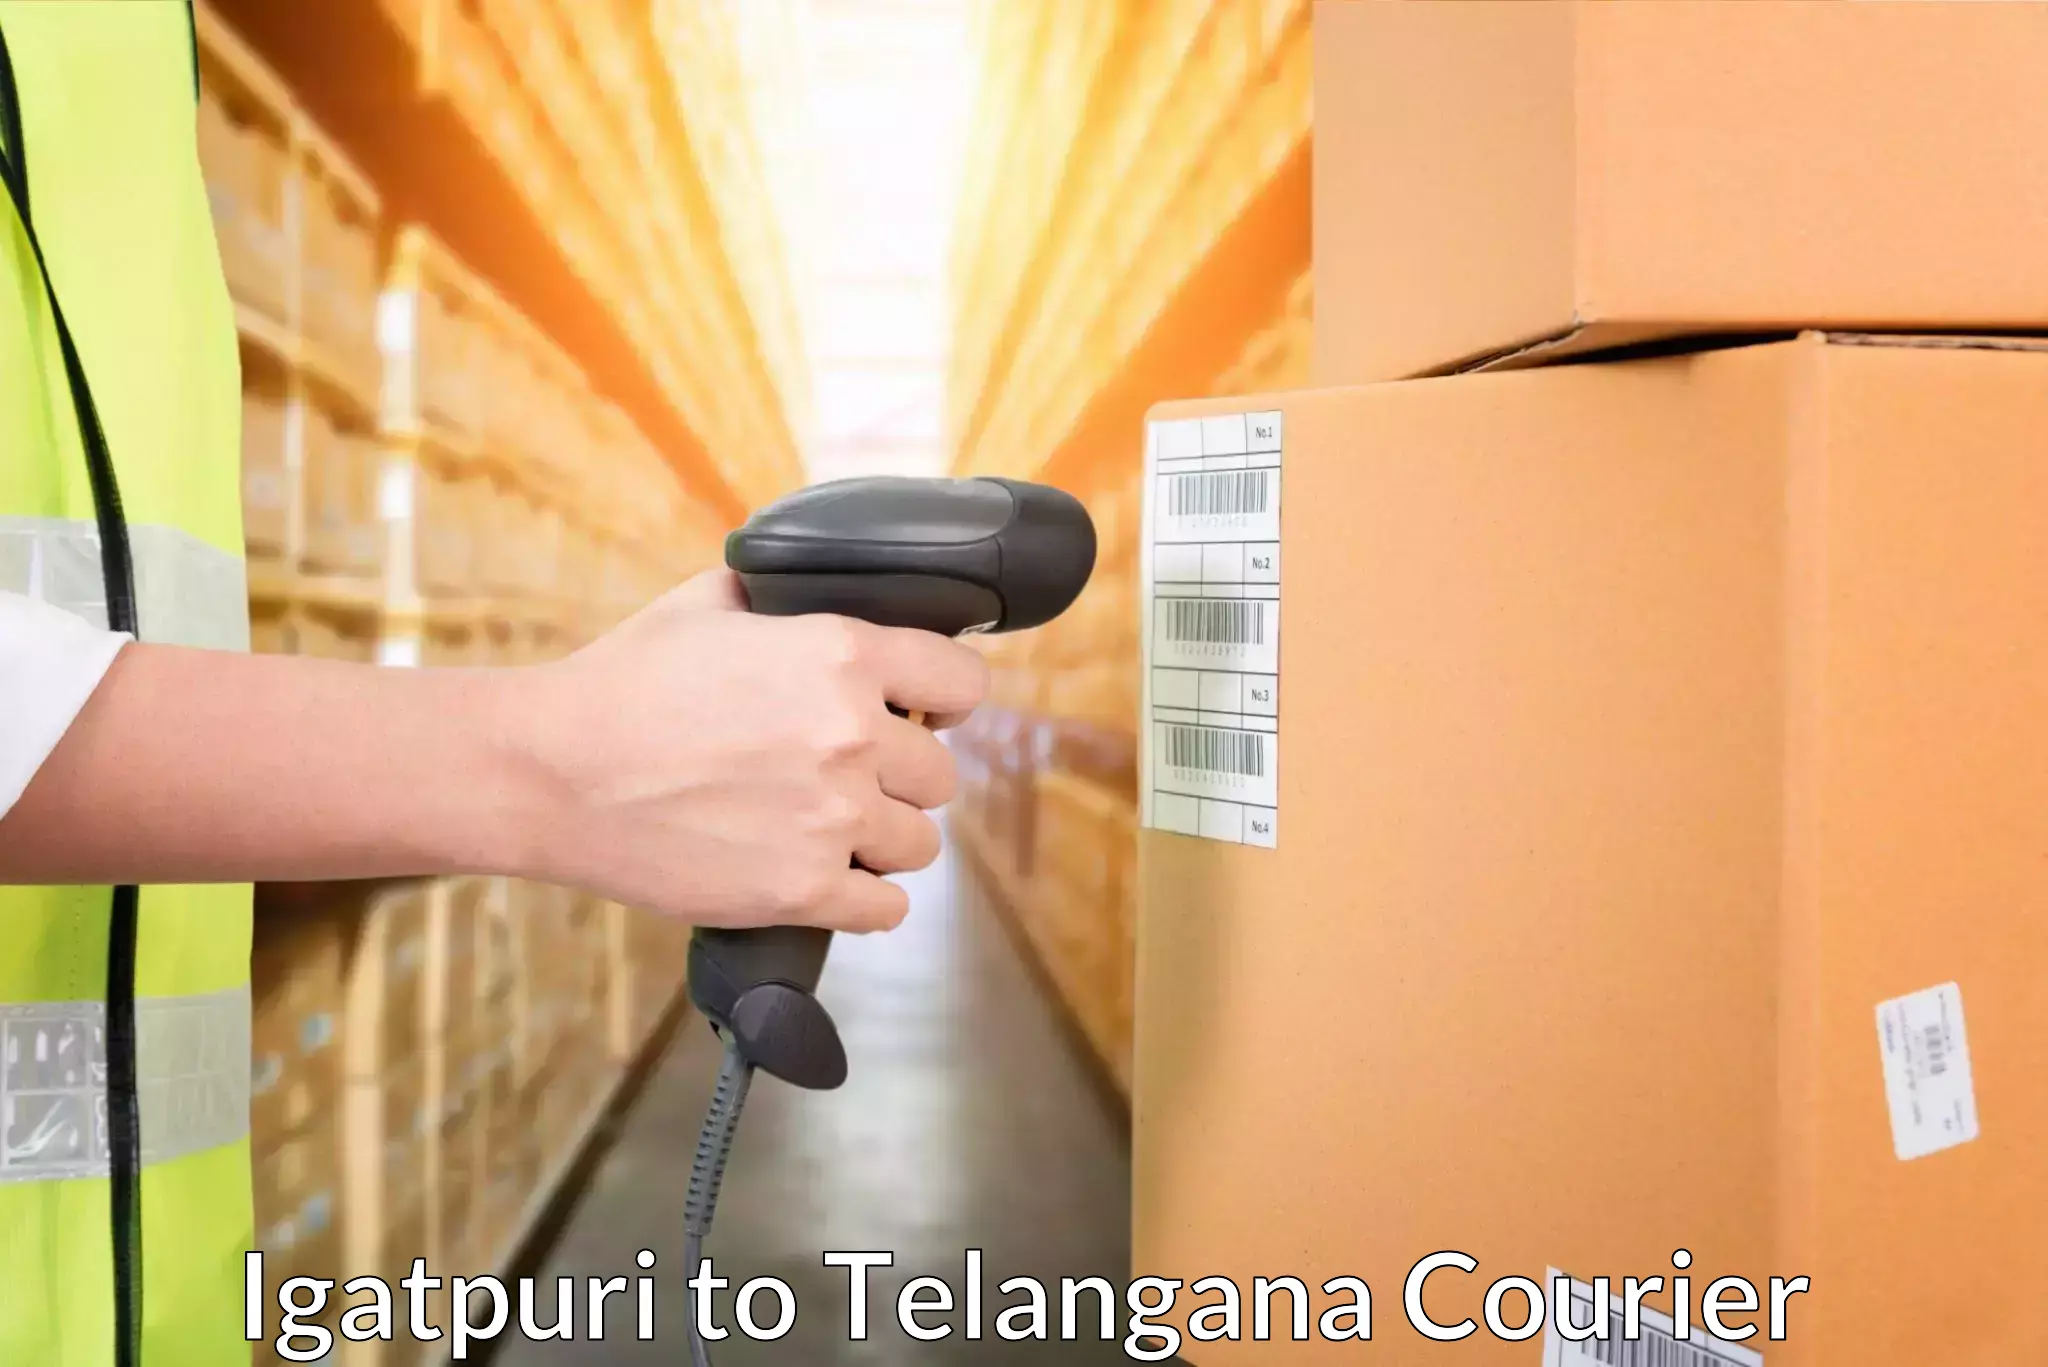 Reliable parcel services in Igatpuri to Hyderabad